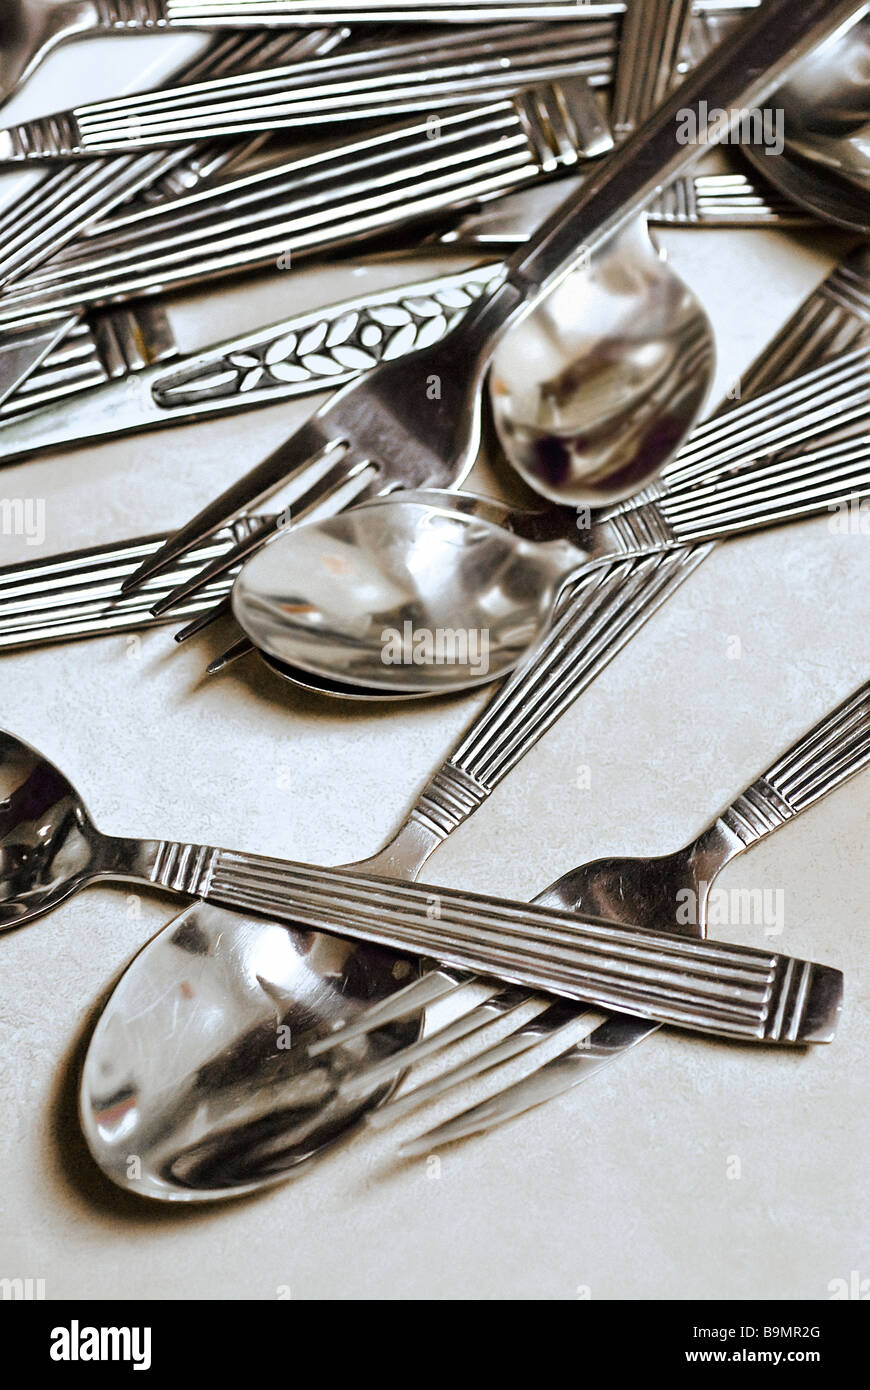 Silverware spread out on table Stock Photo